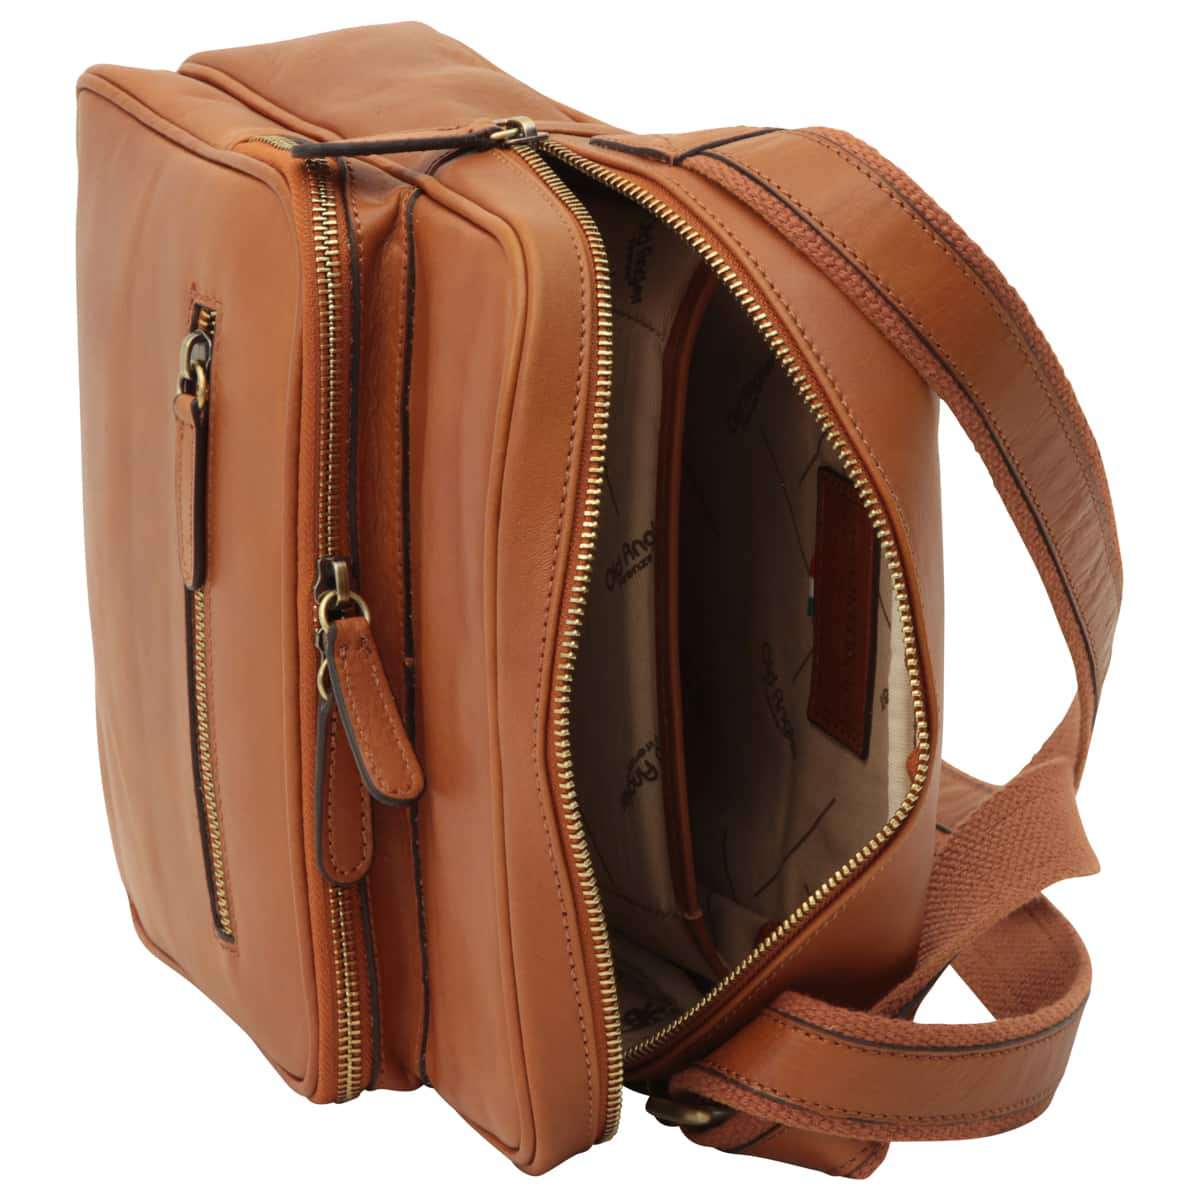 Small leather bag with zip closures - Brown Colonial | 409389CO | EURO | Old Angler Firenze